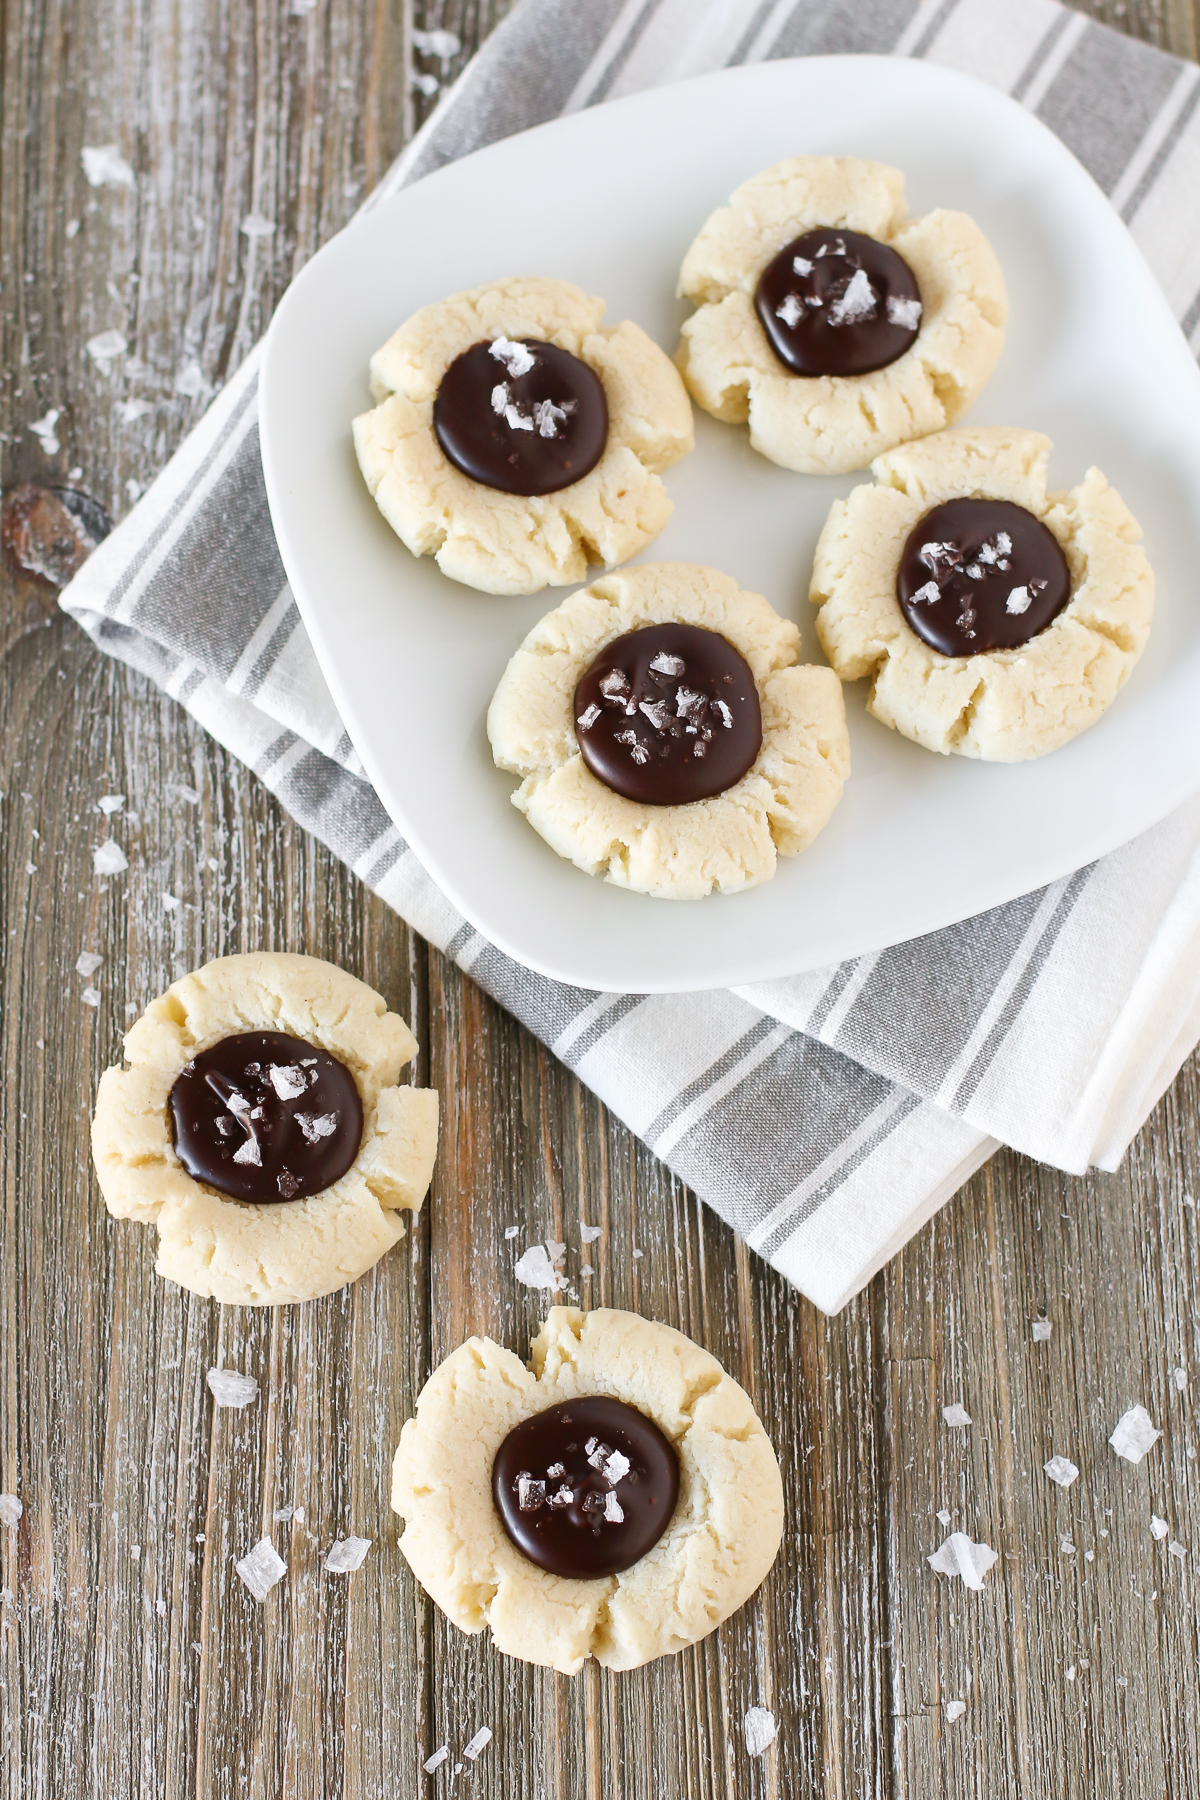 s. Soft almond thumbprint cookies, filled with a decadent chocolate ganache and topped with sea salt flakes.